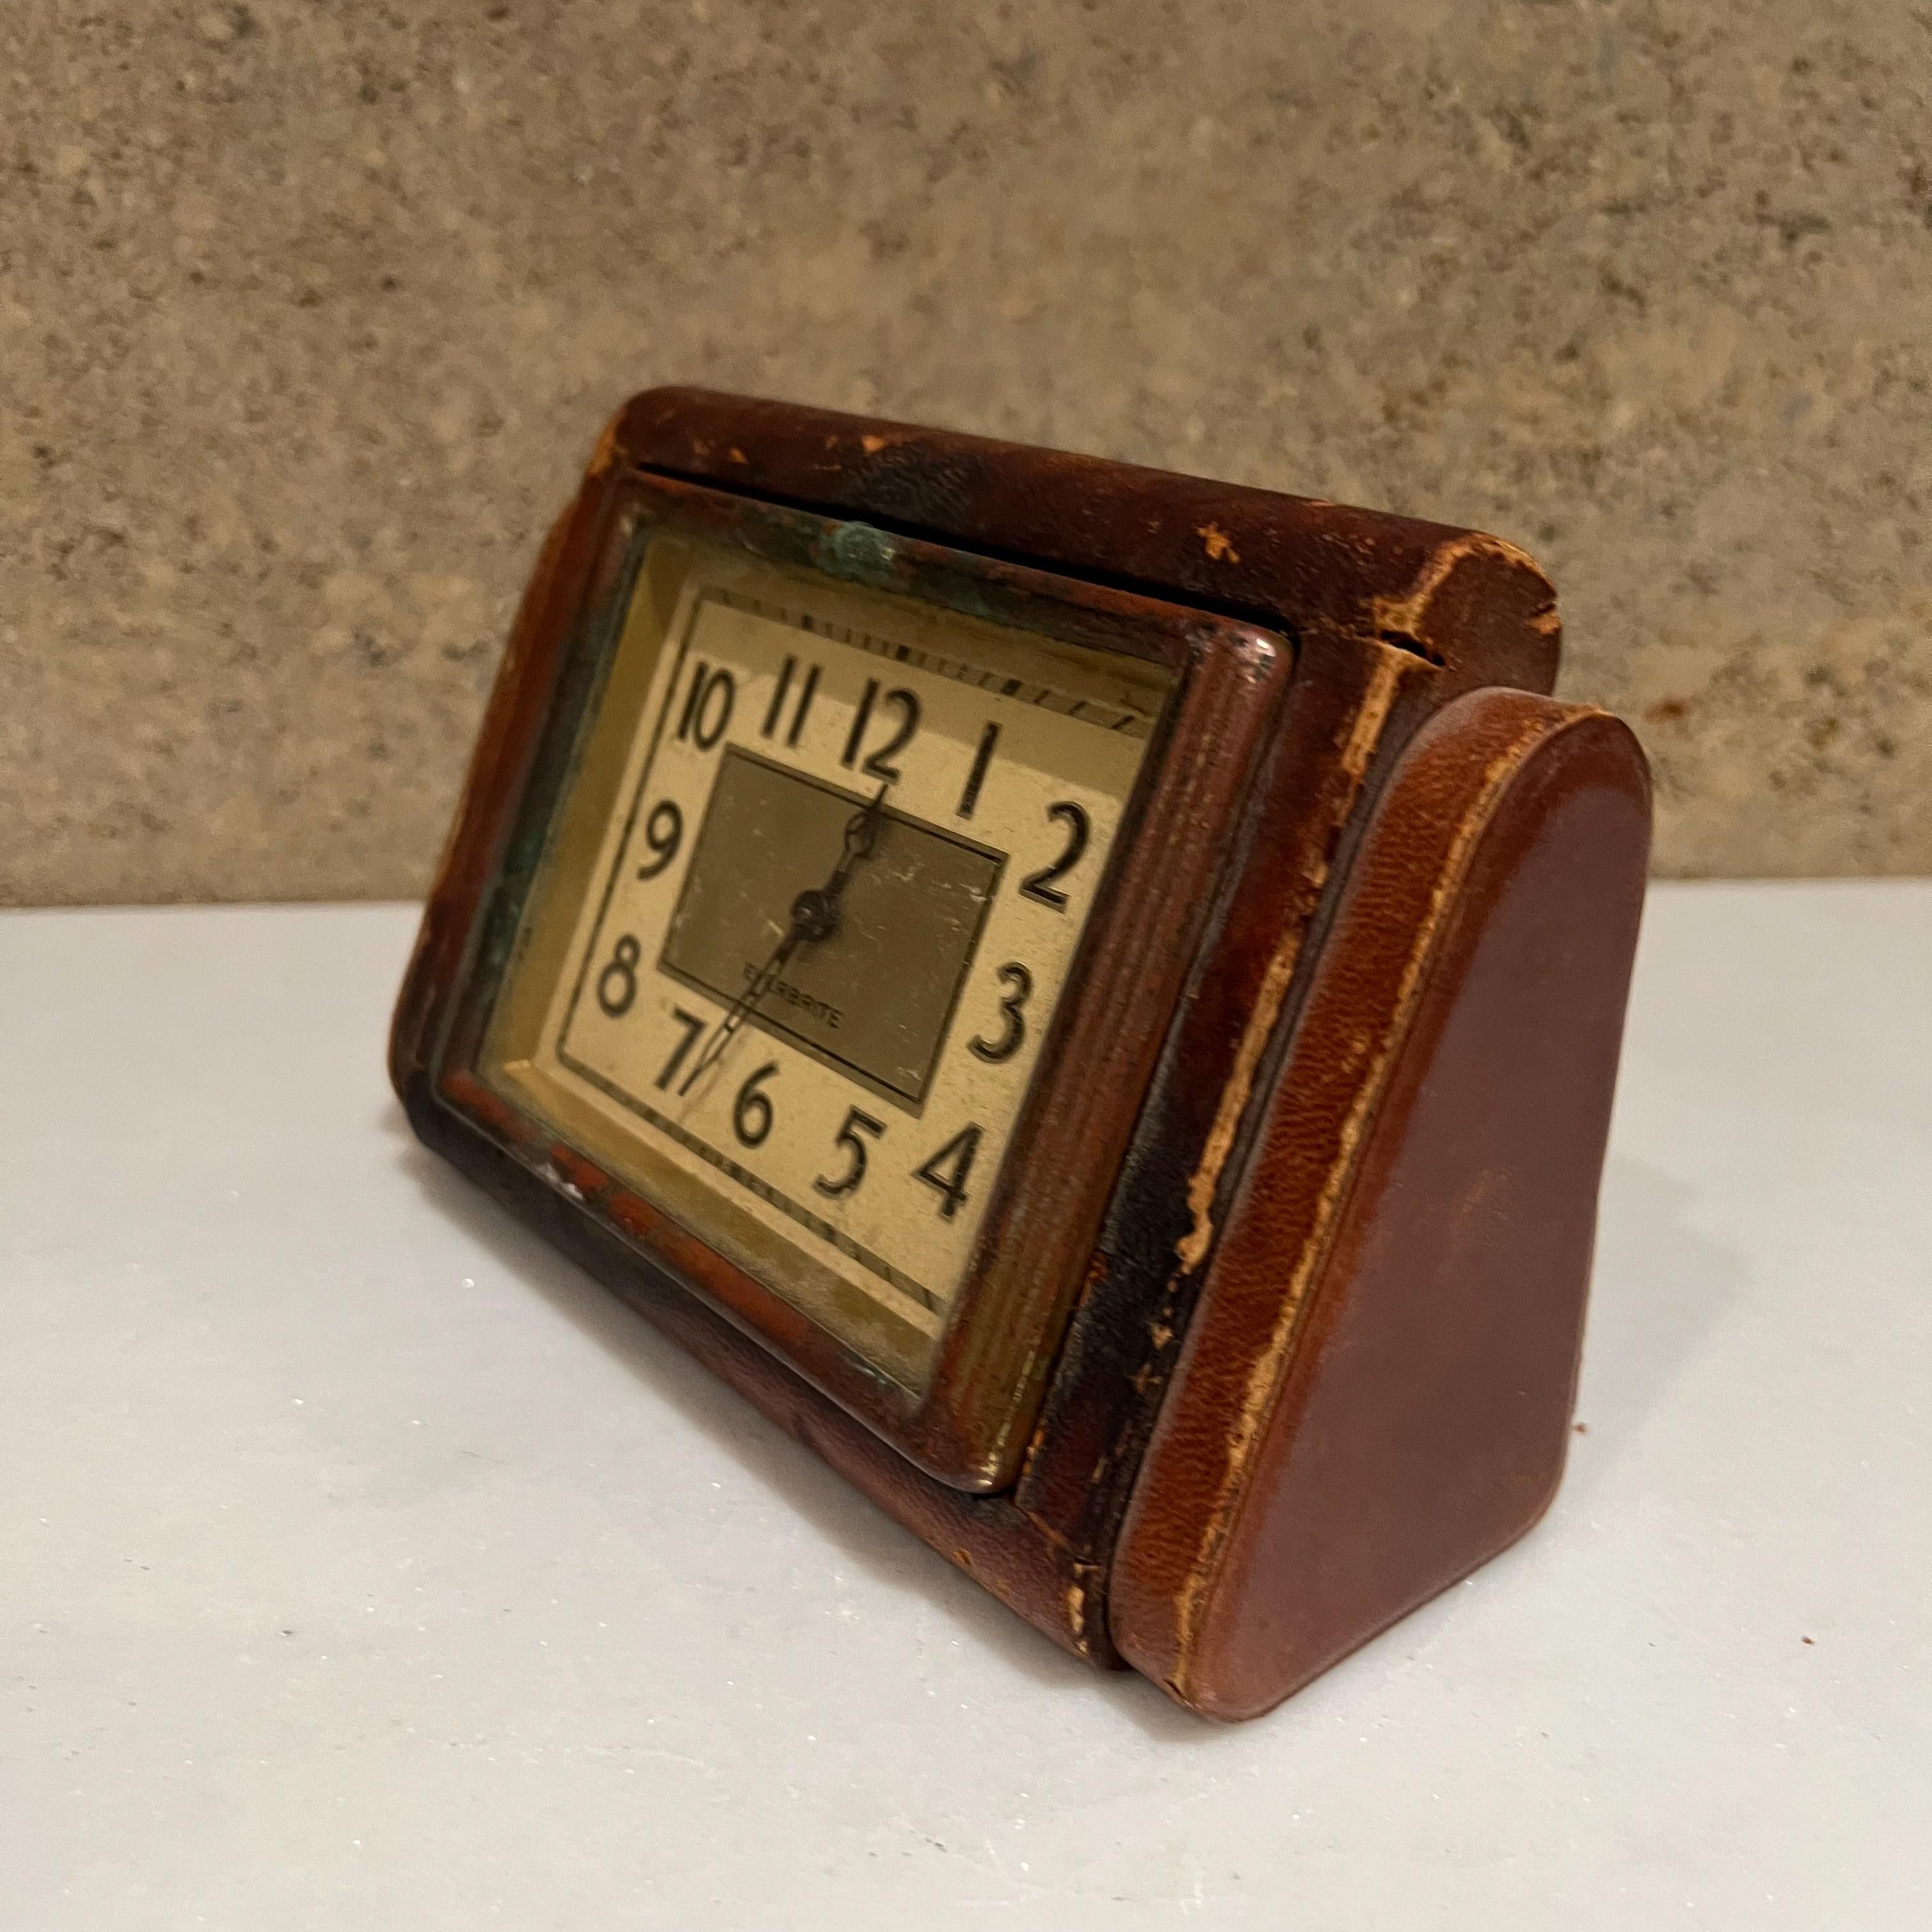 1950s USA Everbrite desk table clock wrapped in leather.
Fabulous looking vintage clock in distressed condition.
Measures: 4 tall x 6.25 width x 2.5 depth
Preowned vintage unrestored condition. Not in working order. 
Selling as decorative piece